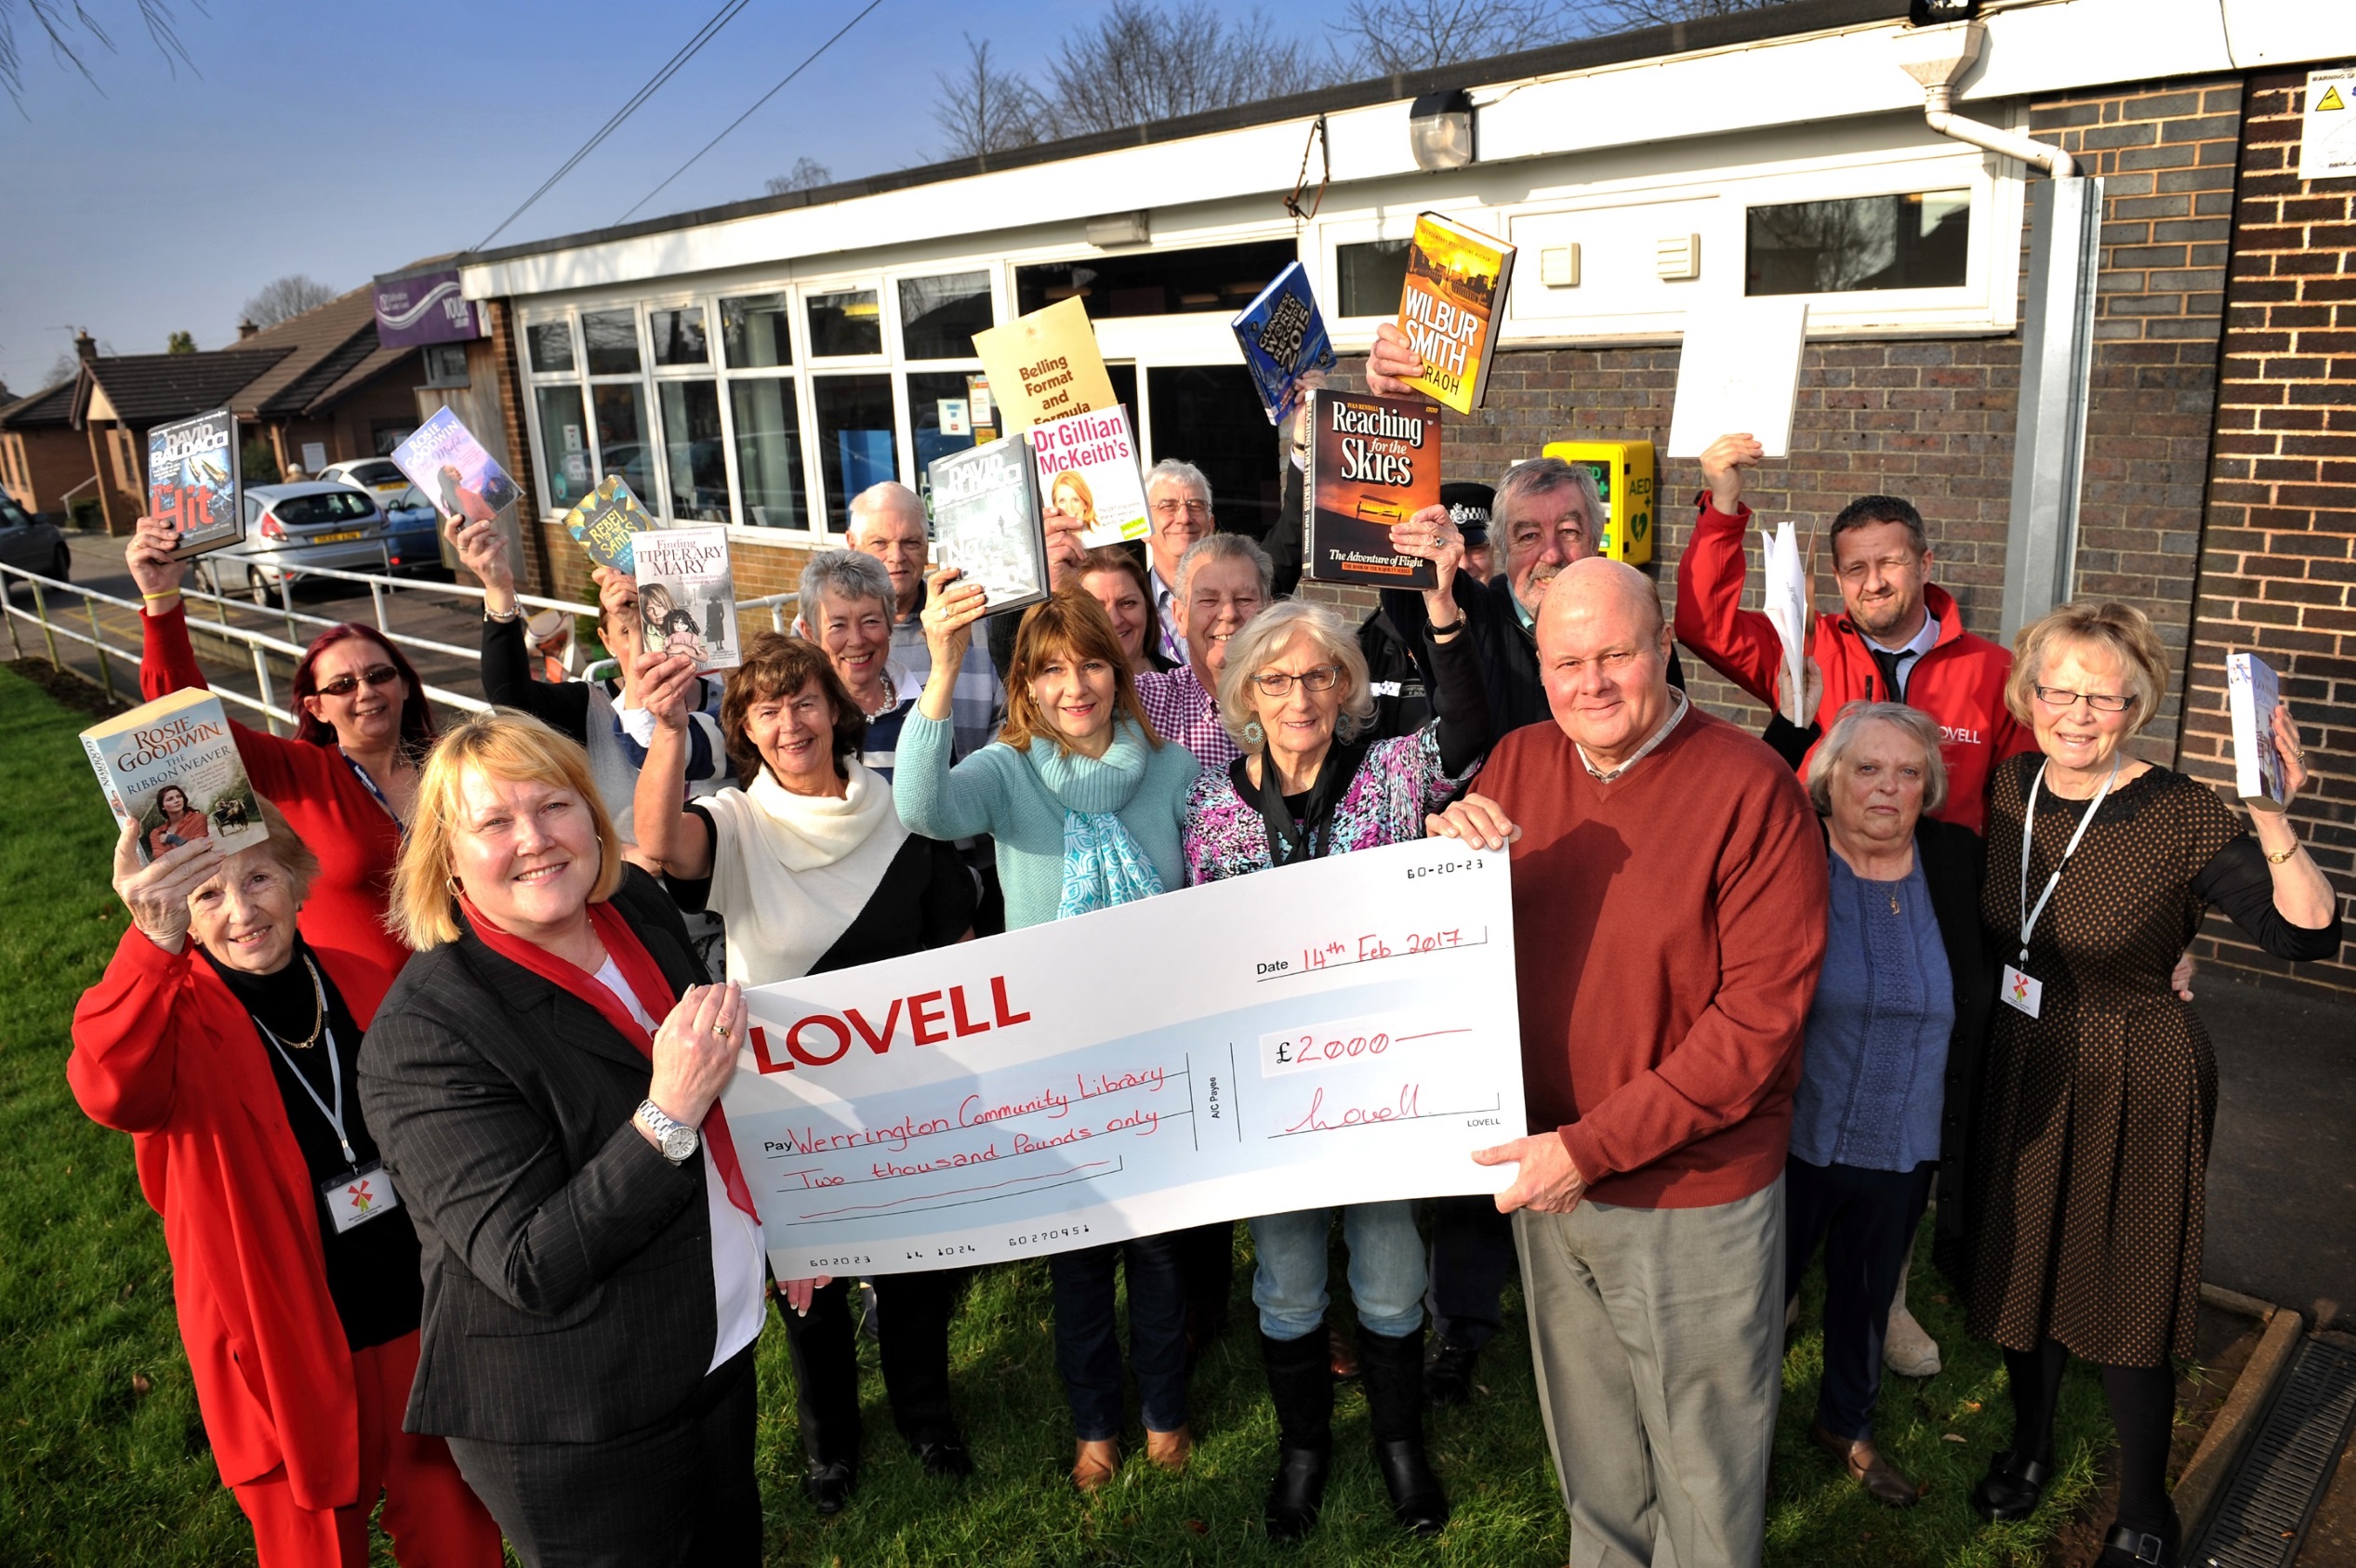 Lovell provides funding lifeline for pioneering Staffordshire village library and community centre